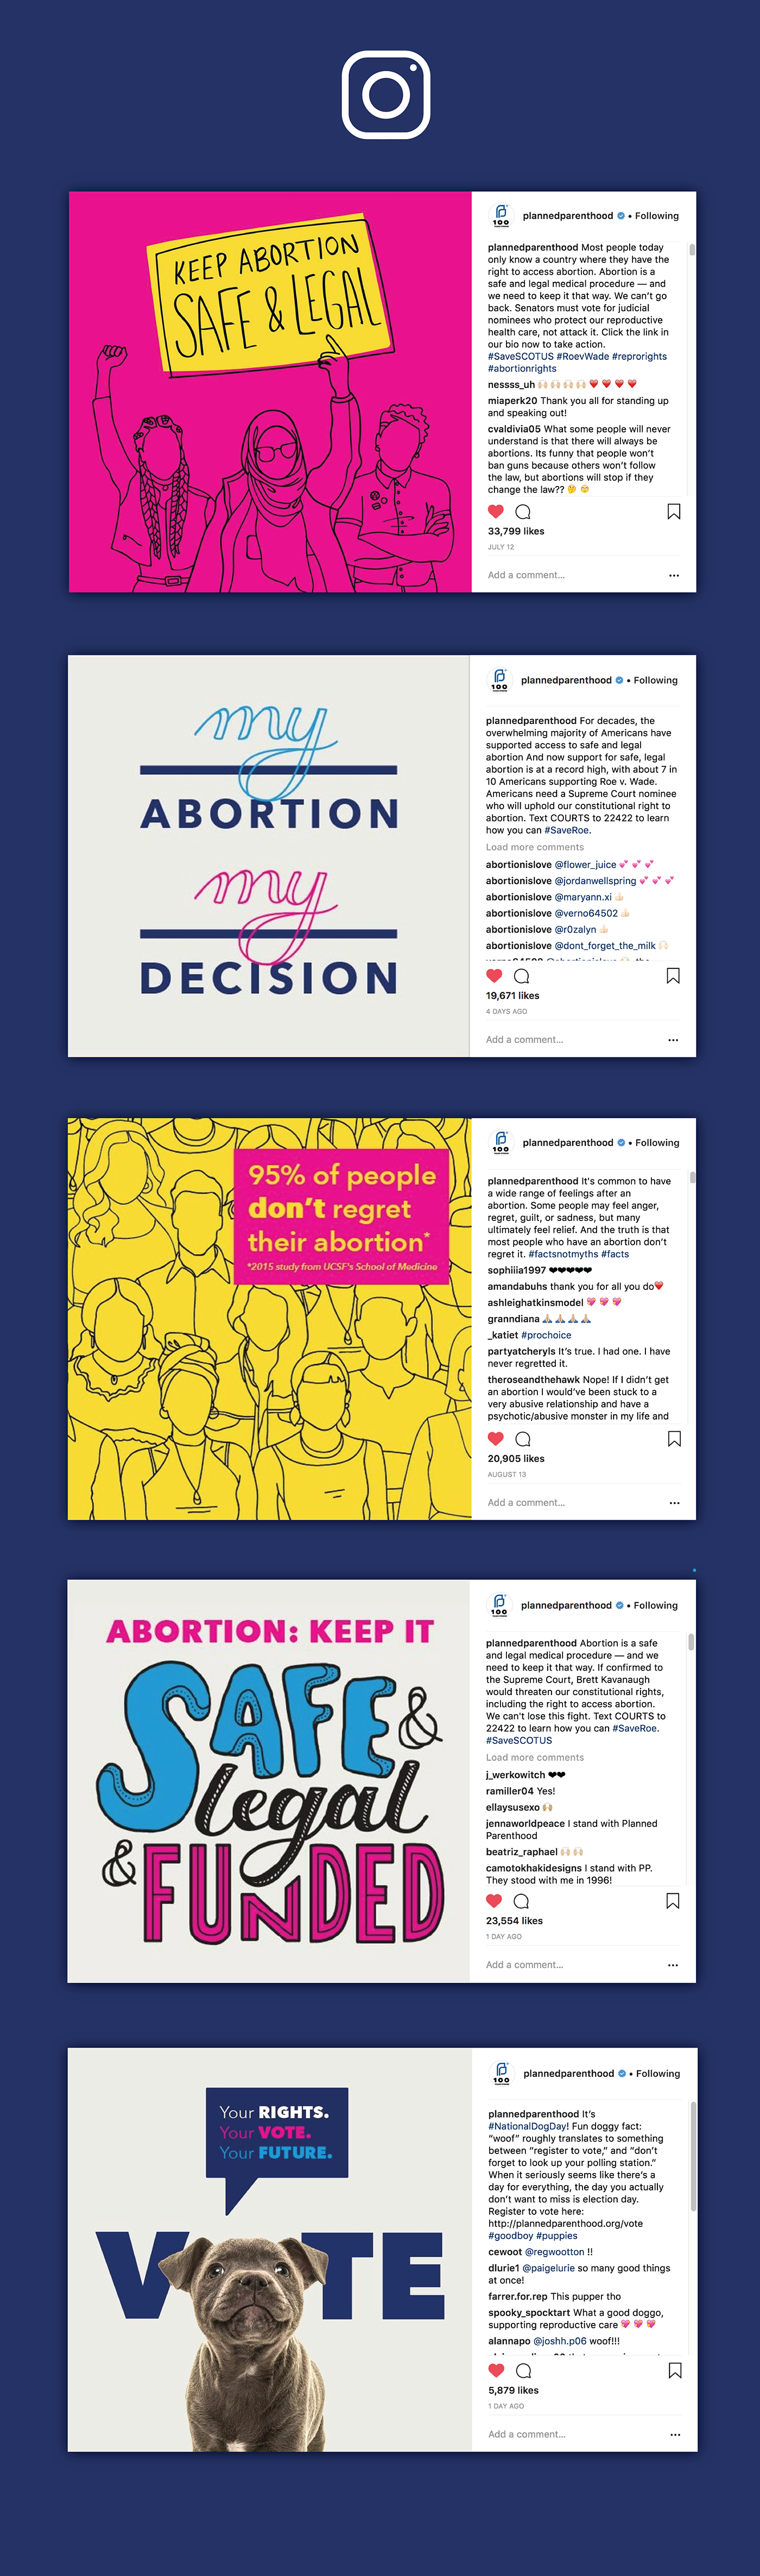 social media planned parenthood reproductive justice reproductive rights abortion voting voter voter registration campaign voter registration campaign